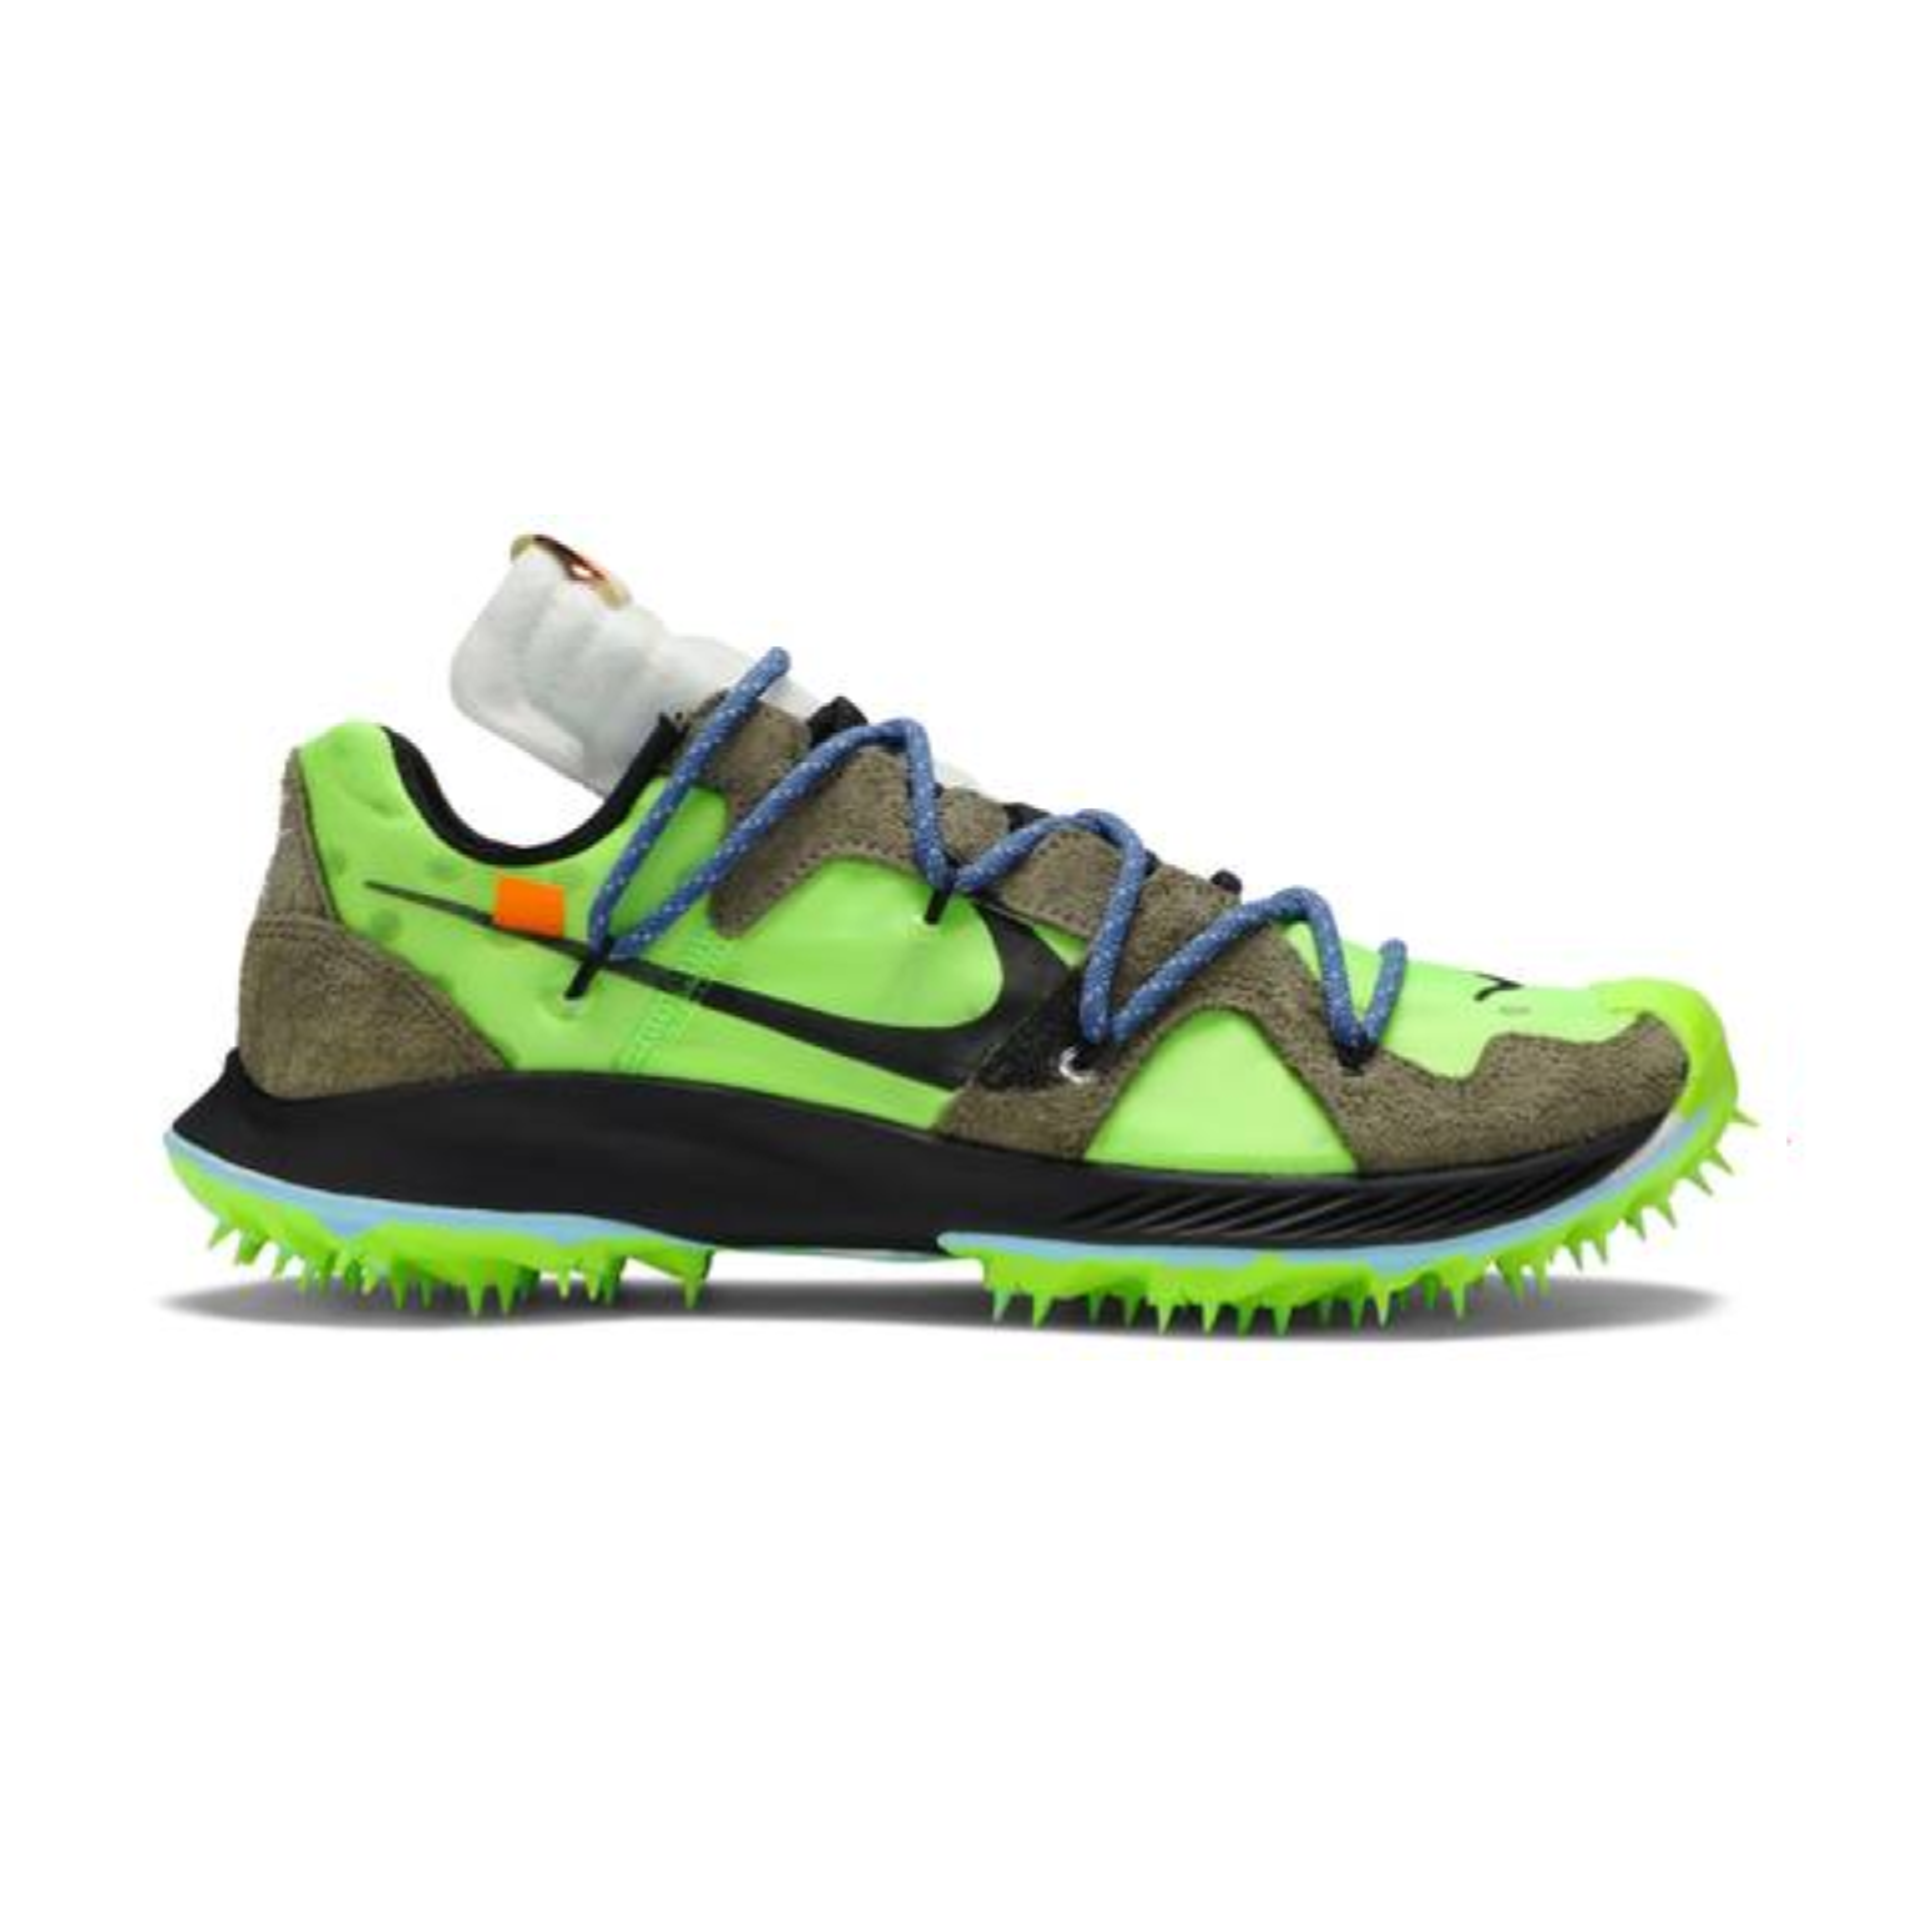 Nike OFF-WHITE x Wmns Air Zoom Terra Kiger 5 'Athlete in Progress - Electric Green'